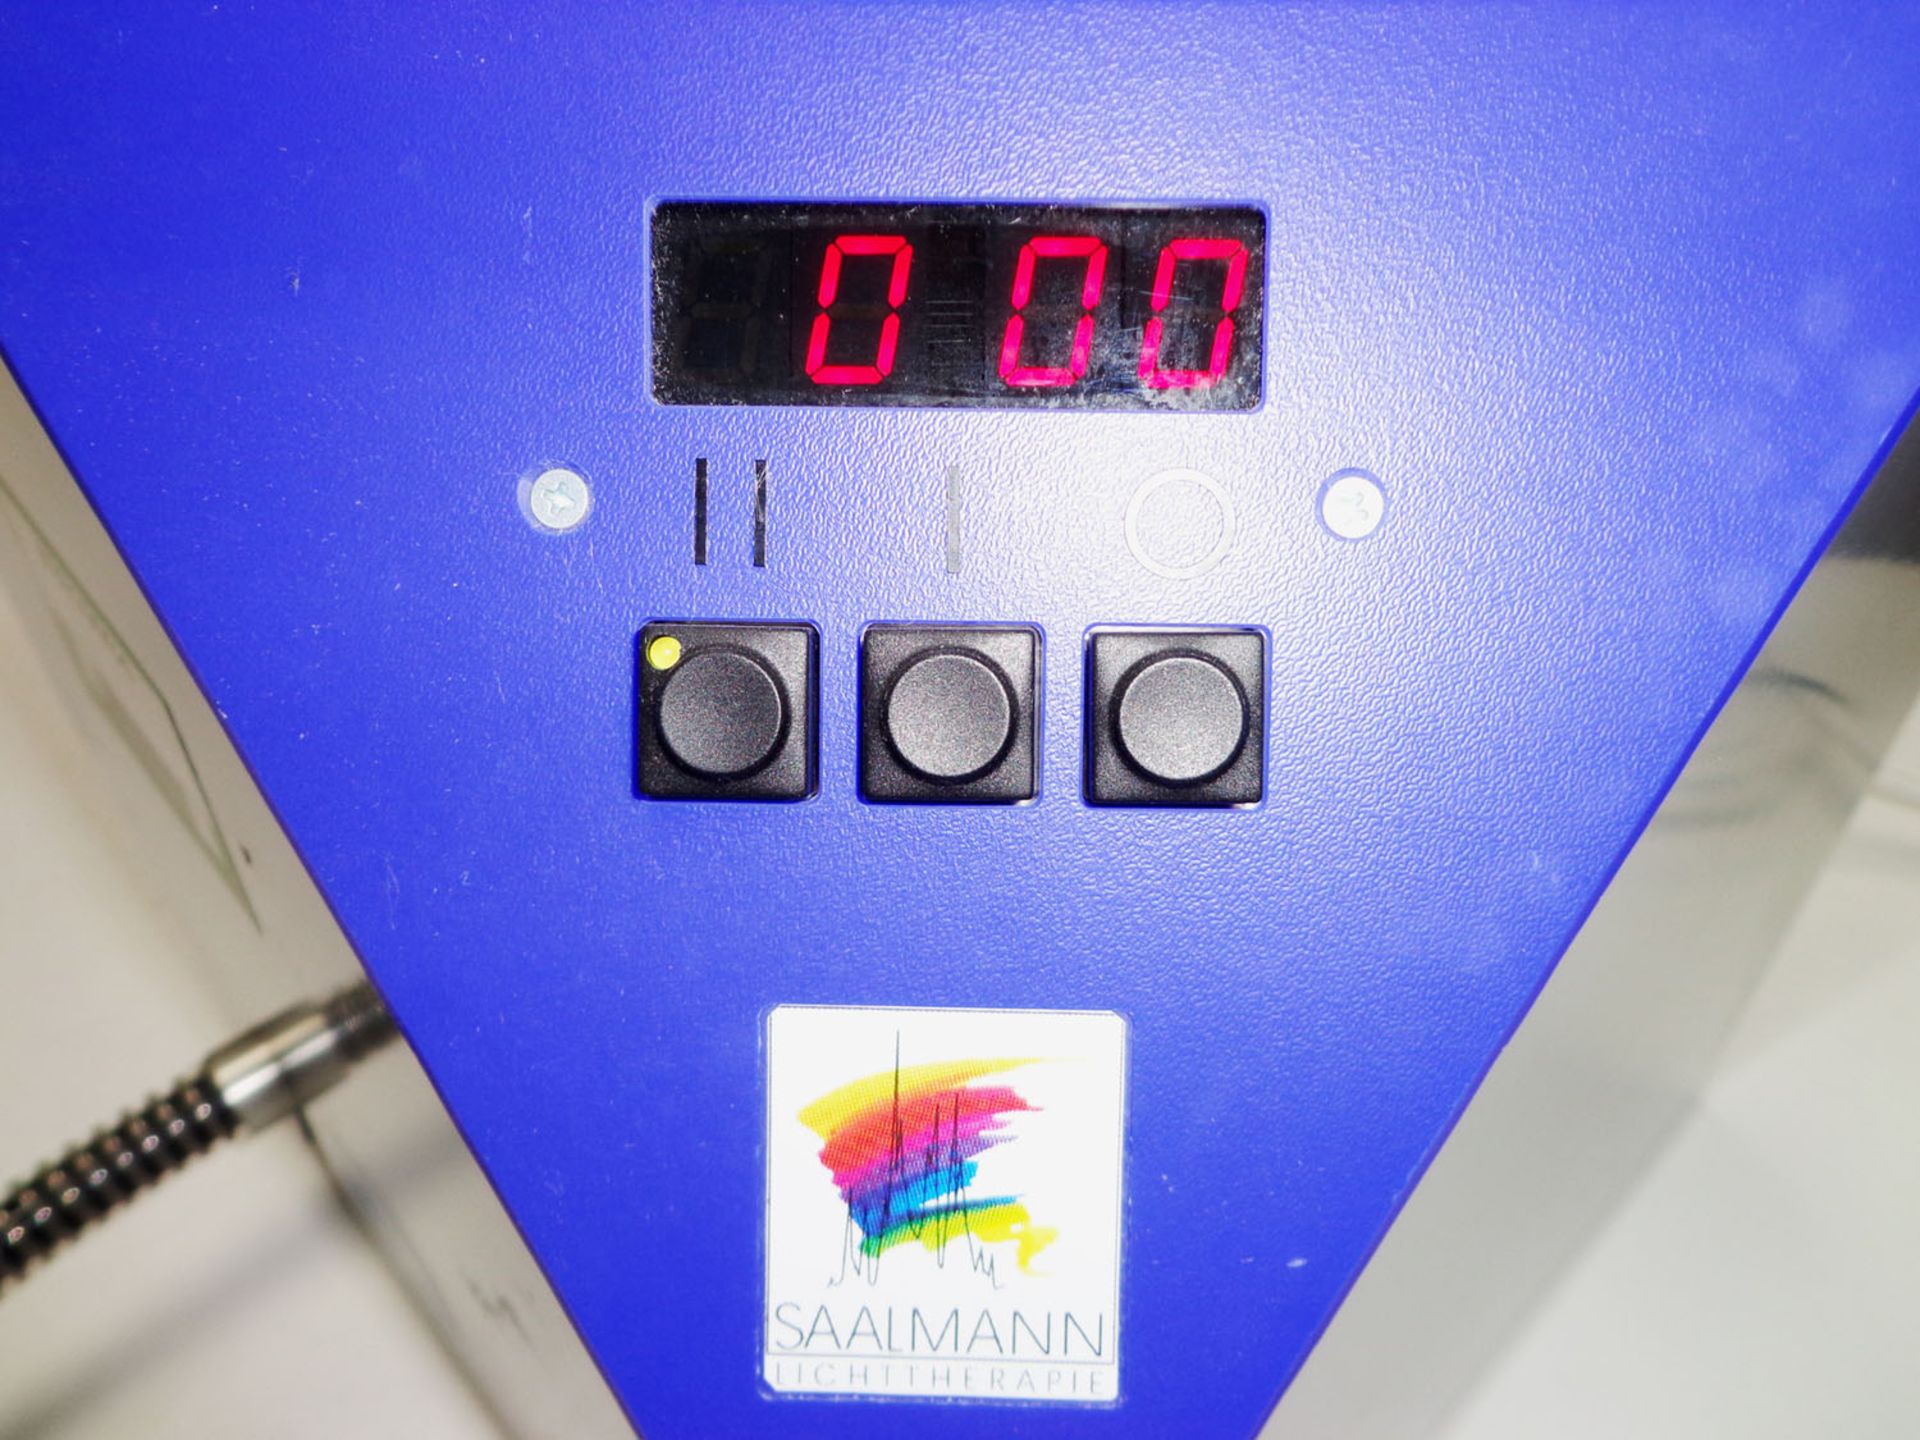 SAALMANN cup cube (Concentrated Ultraviolet Phototherapy), S/N 0608-27-99. - Image 2 of 4